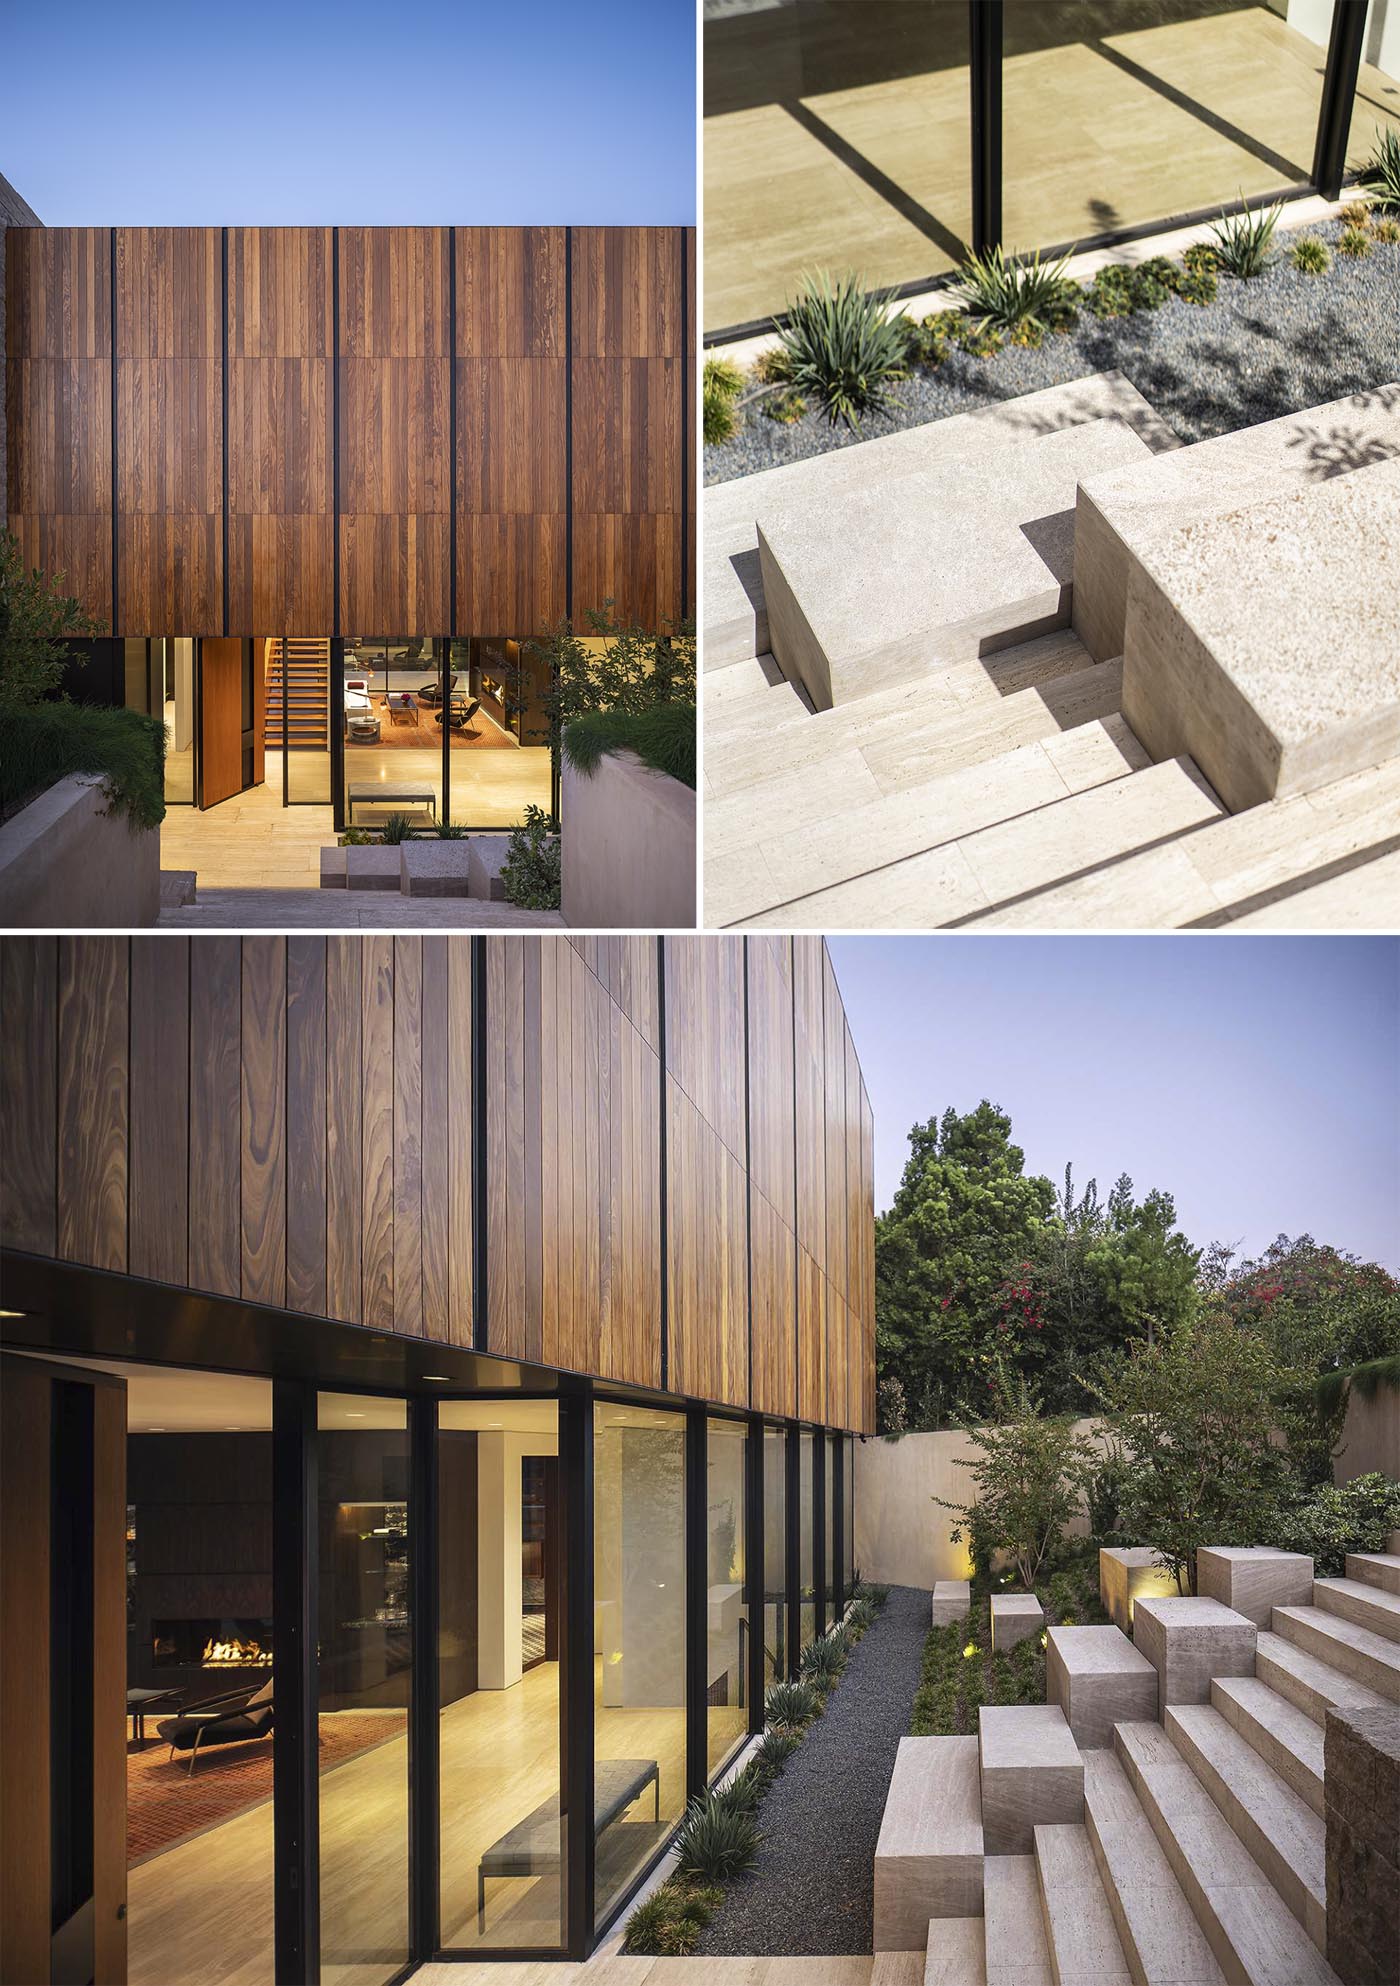 This modern home has been clad in vertically slatted Afromosia wood and split-face Limestone, and include drought tolerant plants.